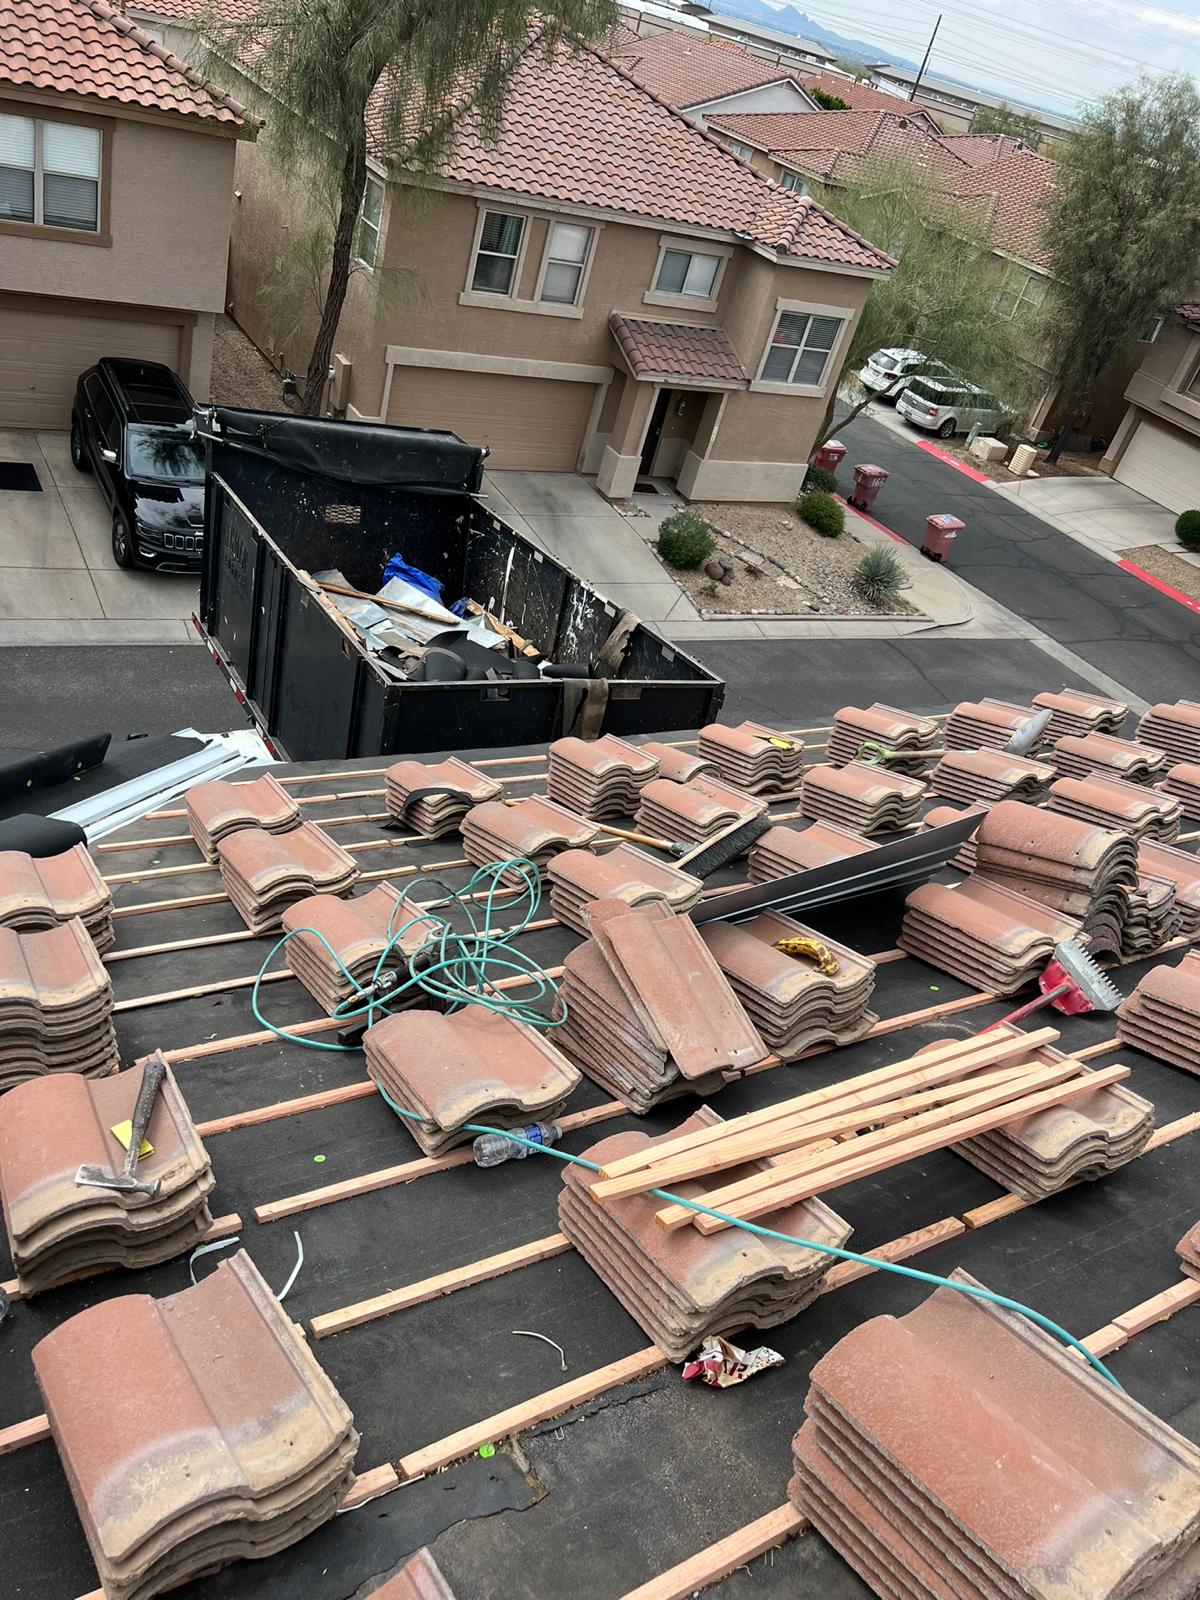 Roofing materials used by Behmer for tile roof leak repair in Chandler.